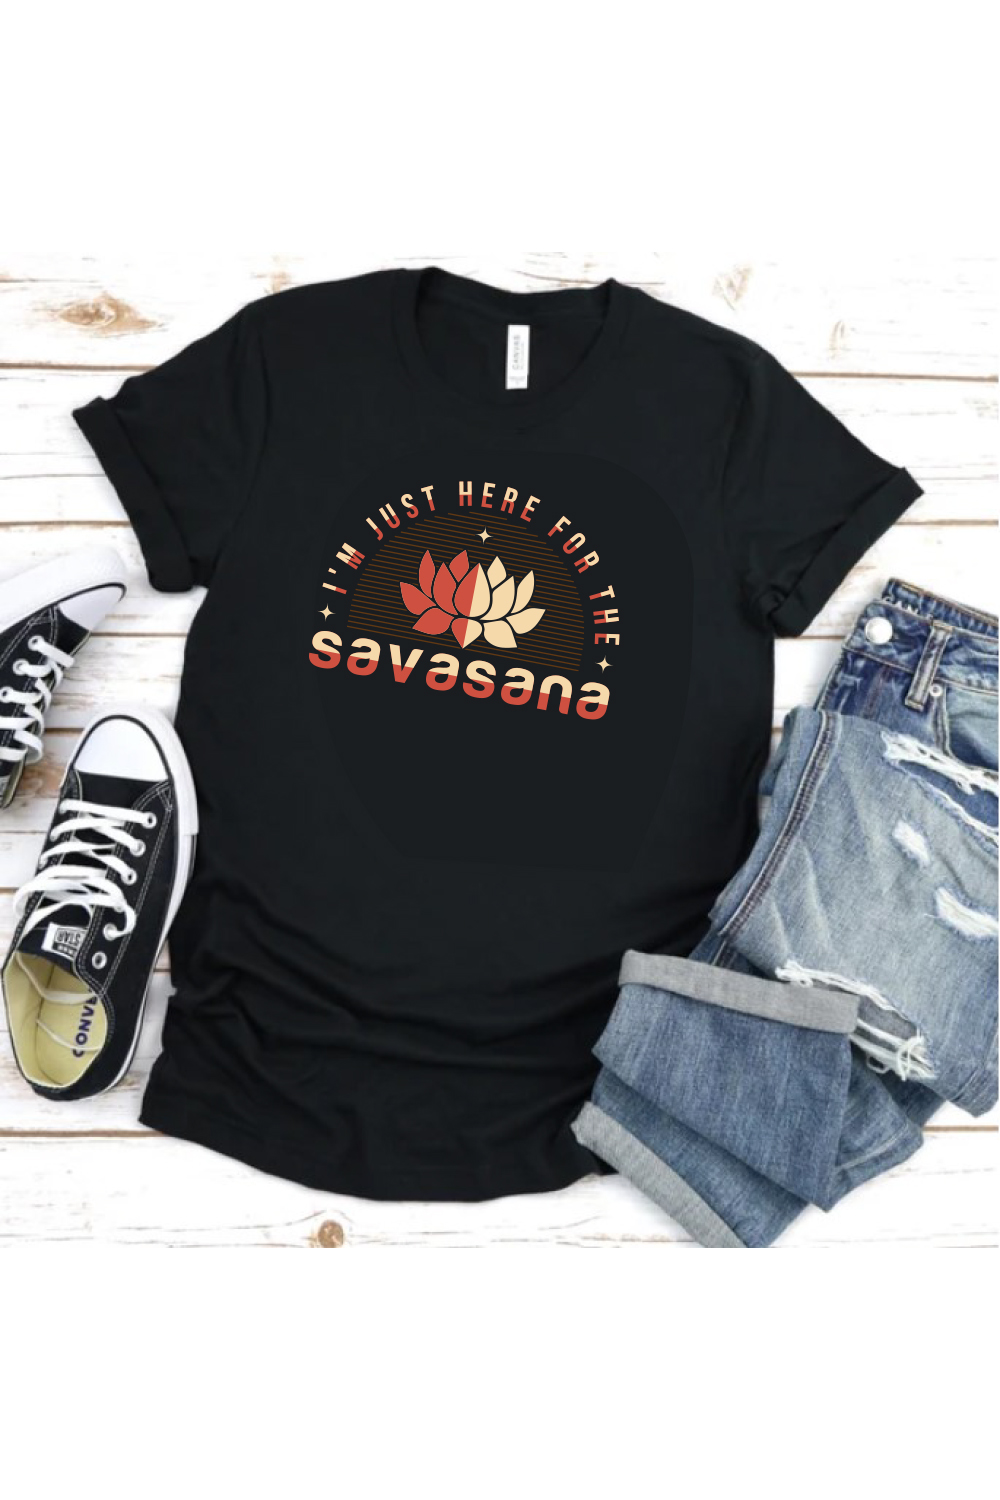 I am just here for the Savasana, an awesome t-shirt design pinterest preview image.